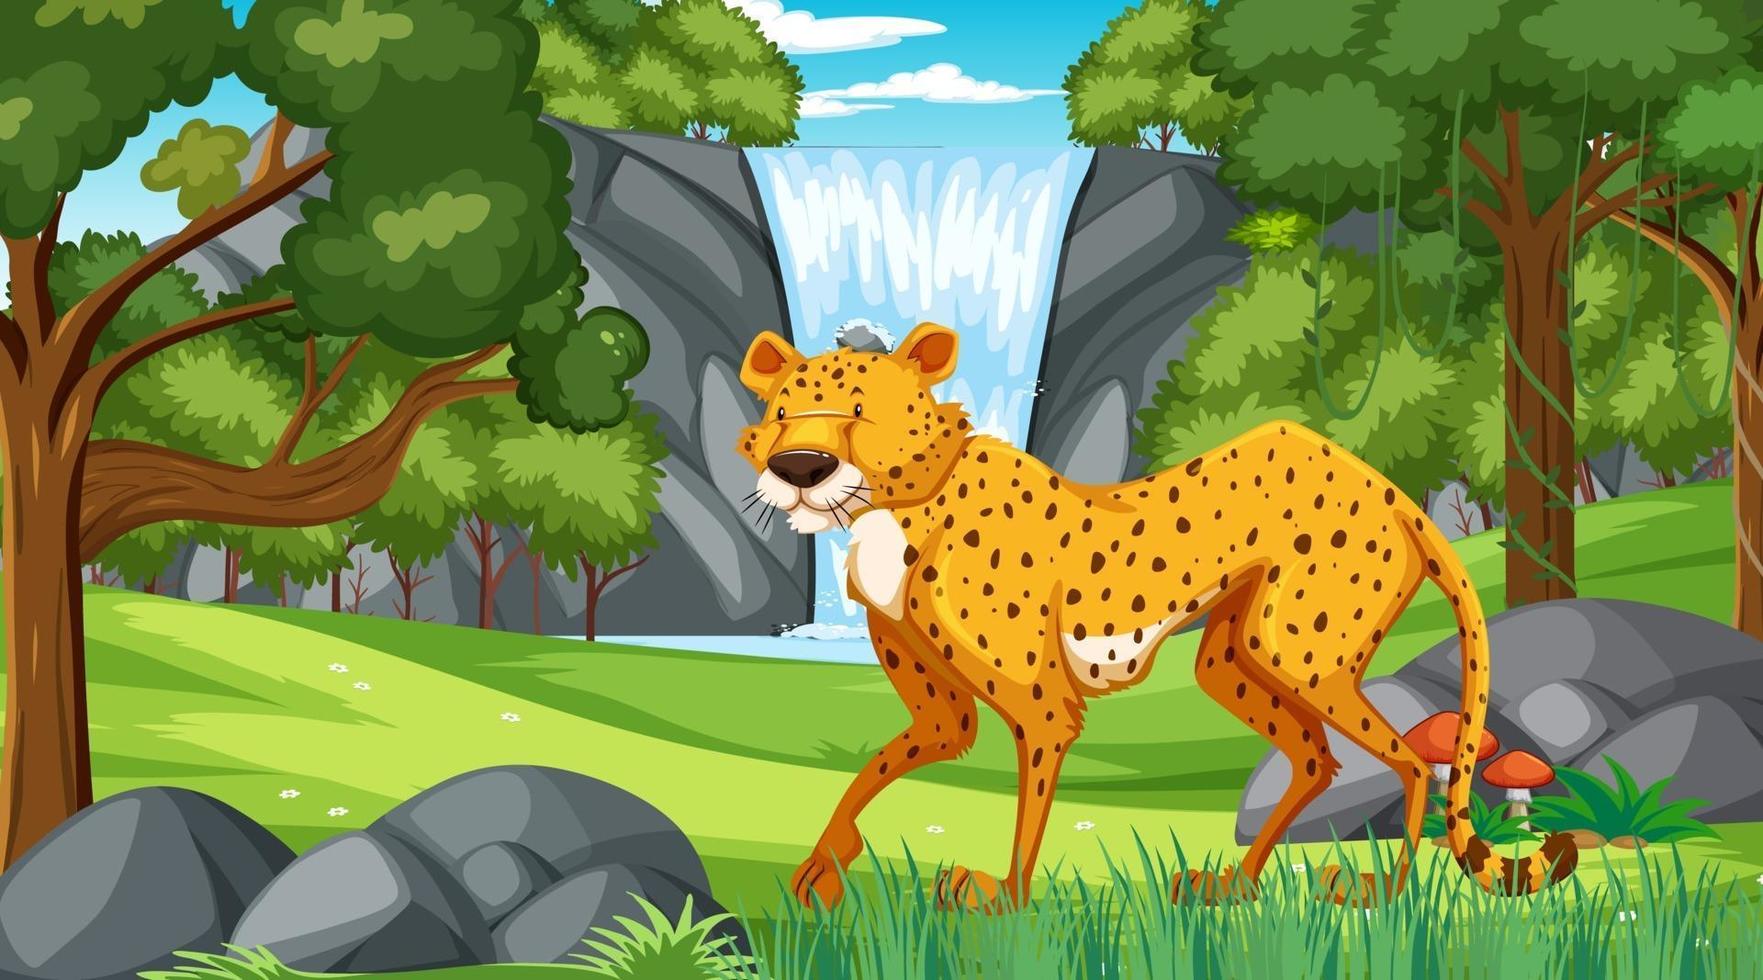 Cheetah in forest or rainforest at daytime scene vector